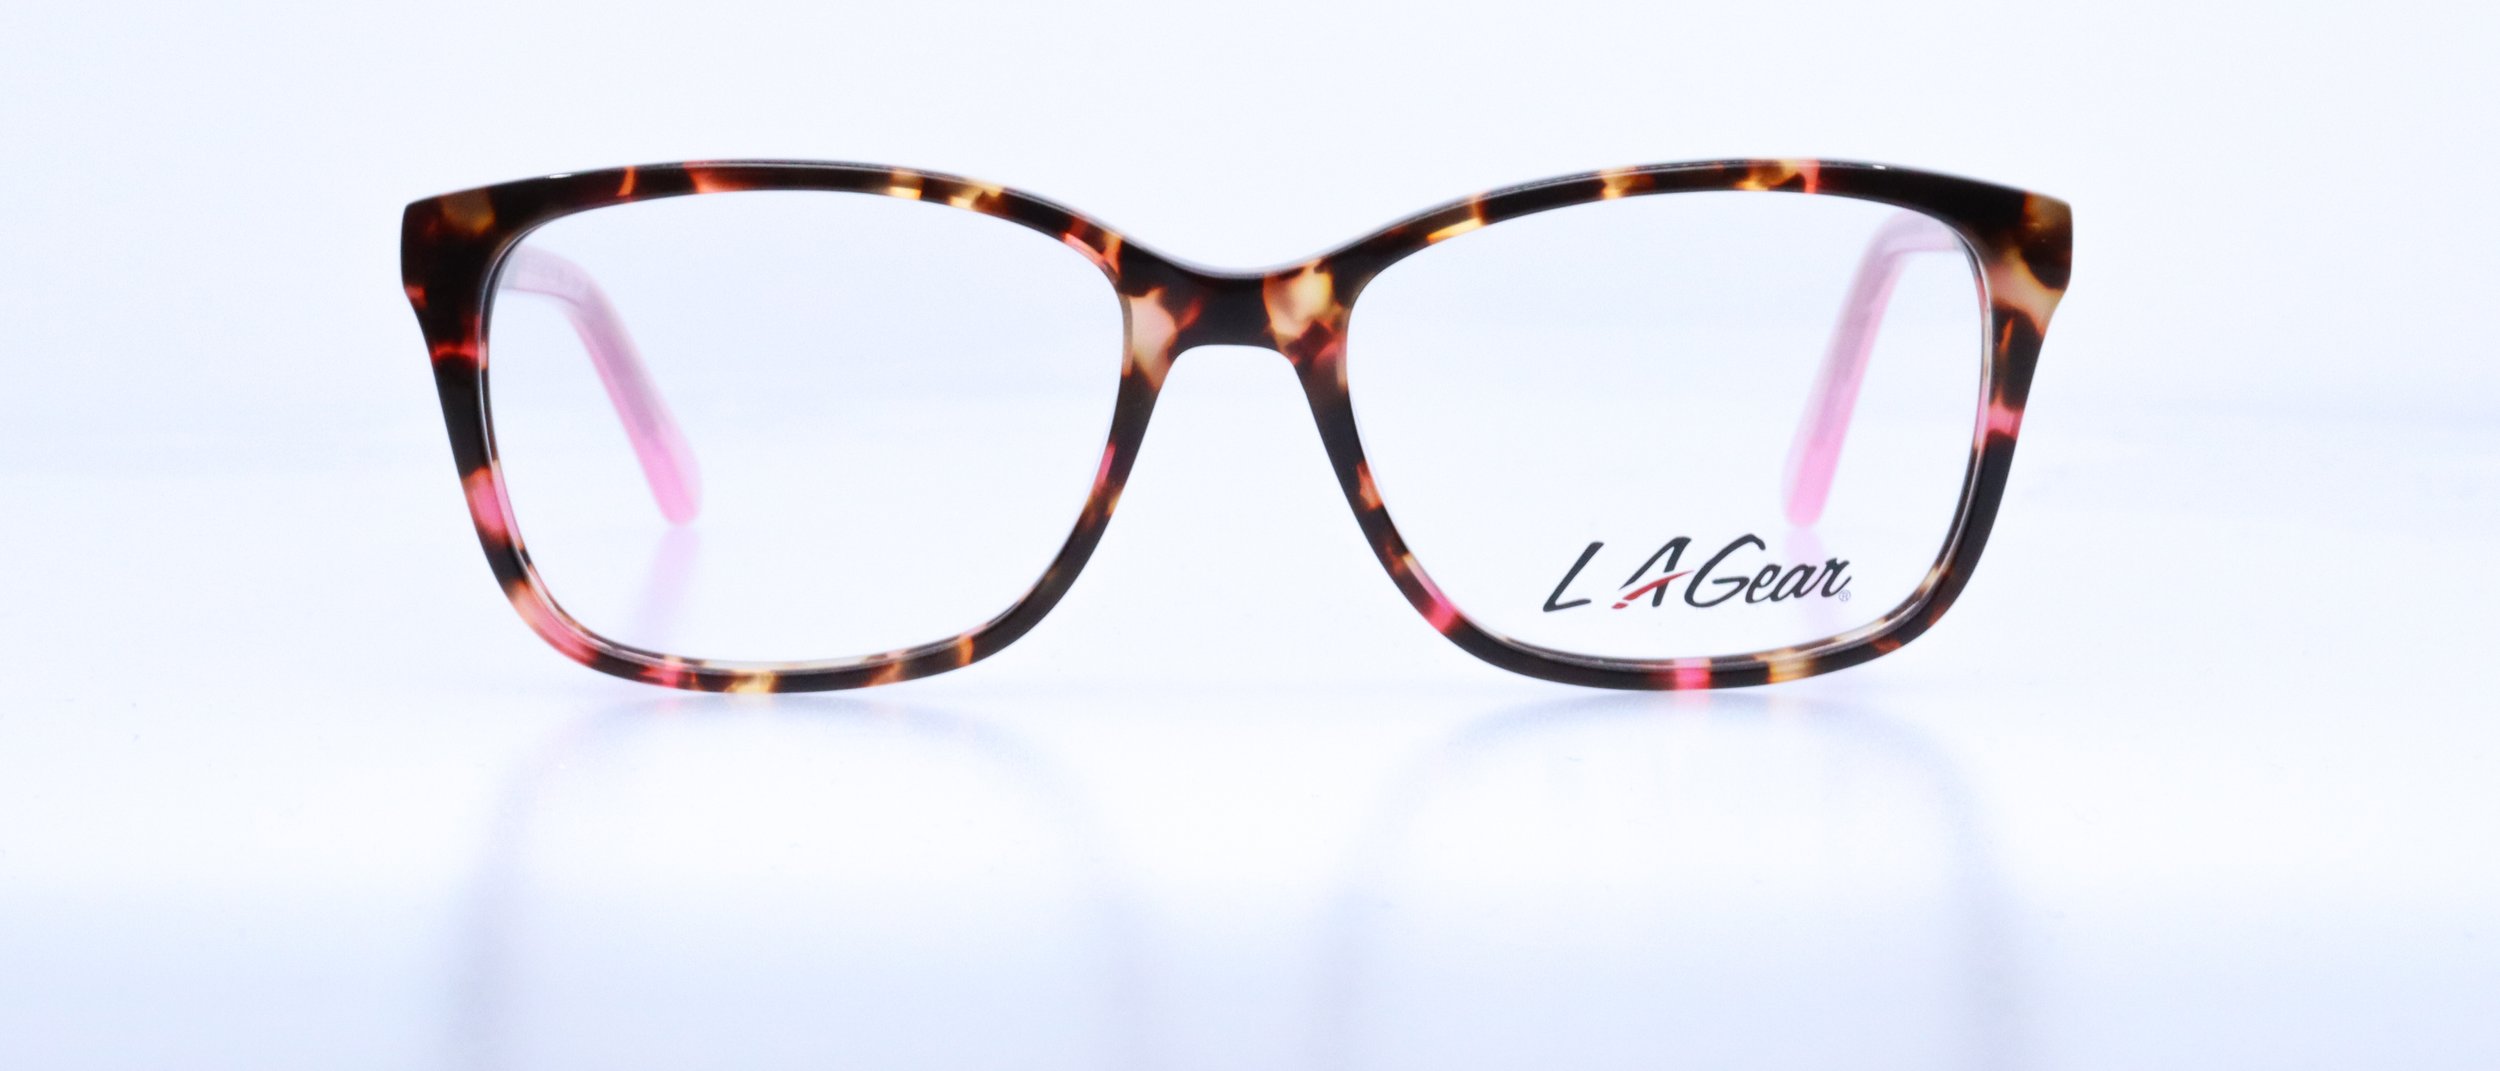  Beverly Hills: 53-17-135, Available in Brown/Blue Demi or Plum/Tortoise 